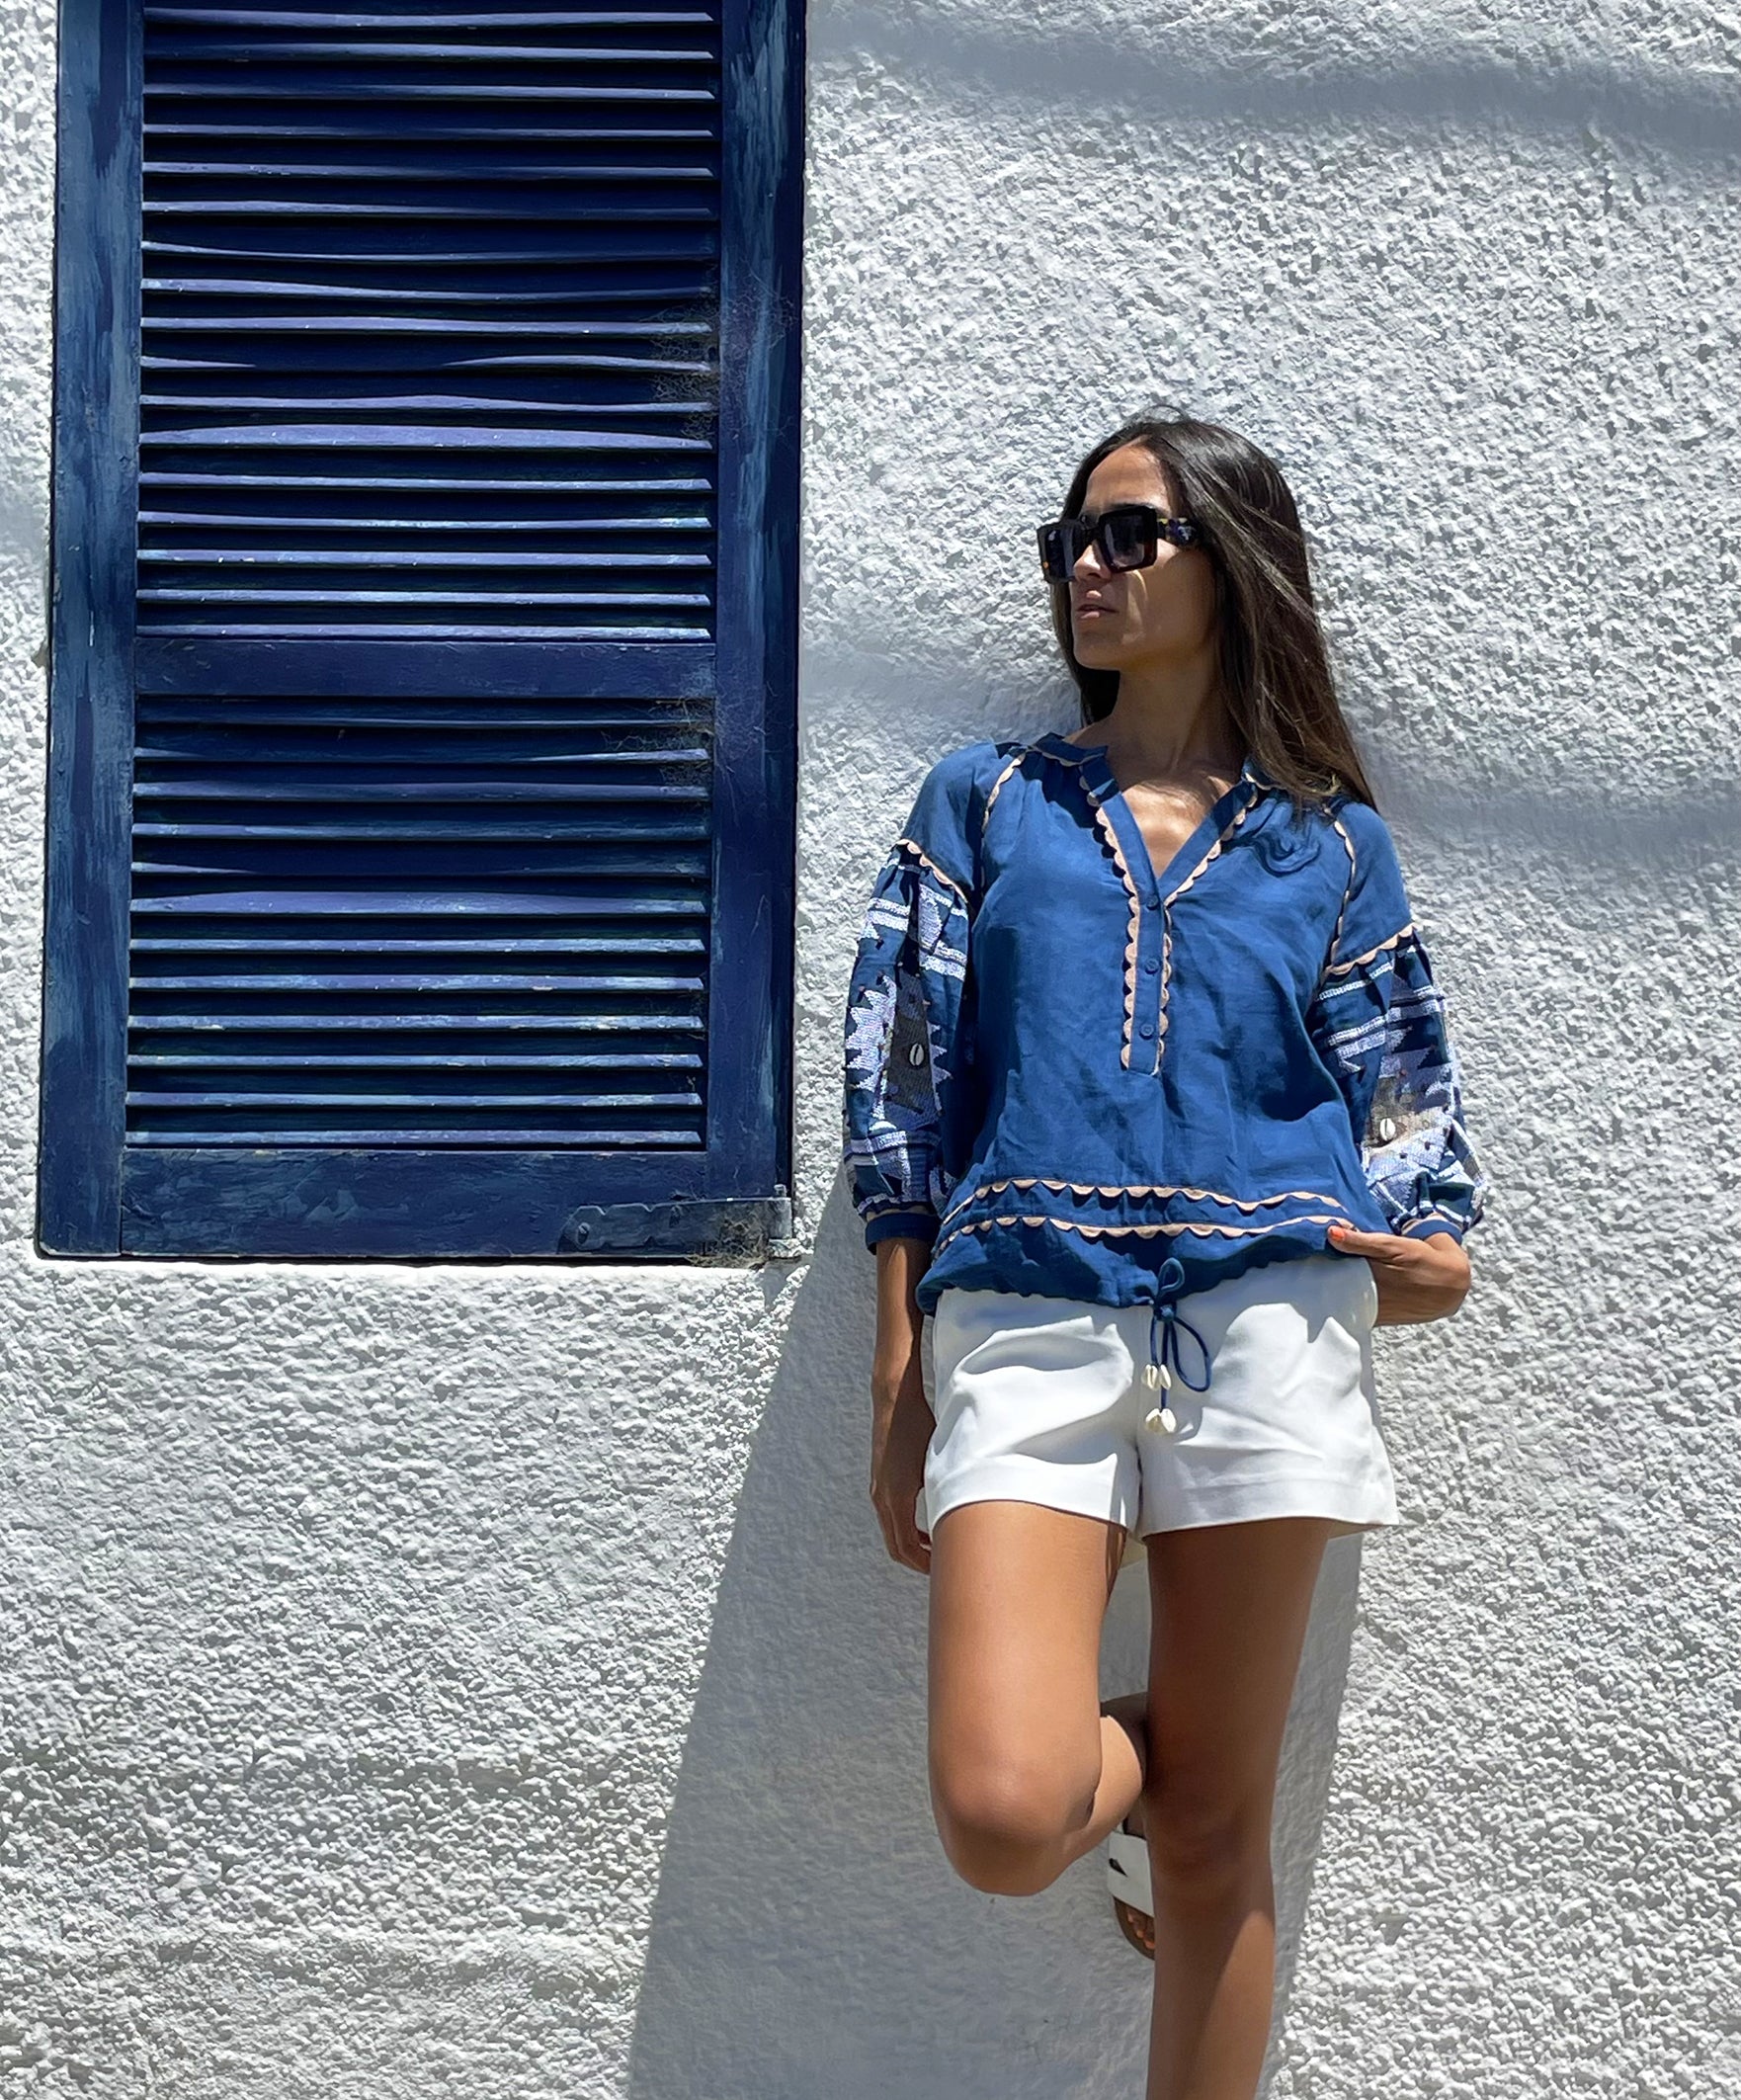 A model stood in front of a white wall wearing a Blue San Marino top, white shorts and sunglasses.